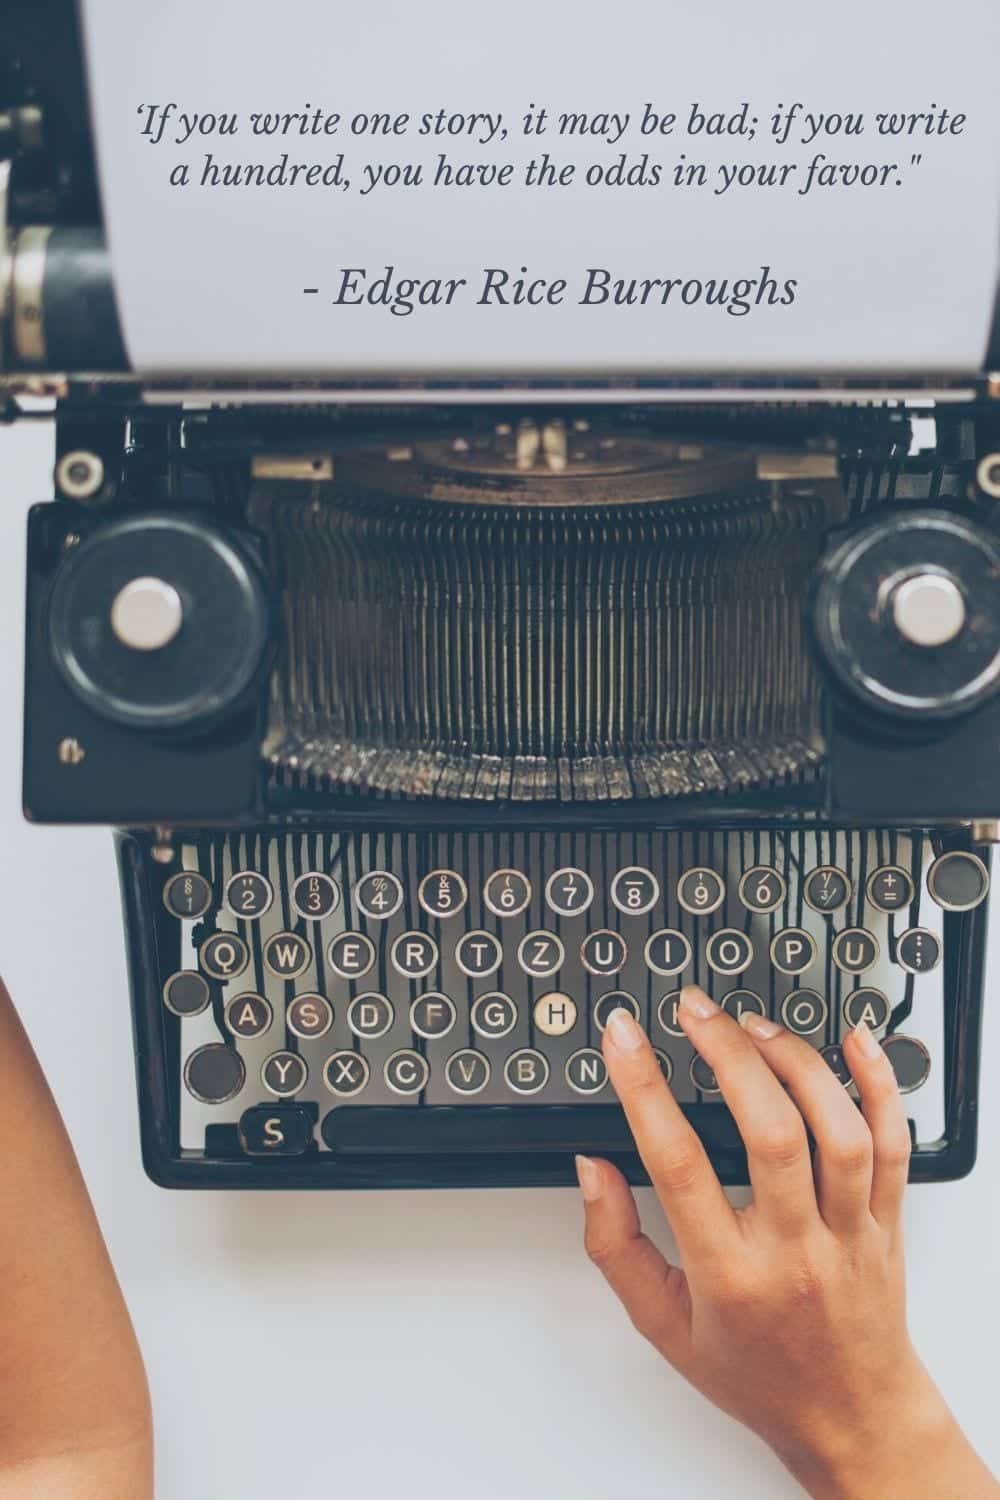 Edgar Rice Boroughs quote on writing